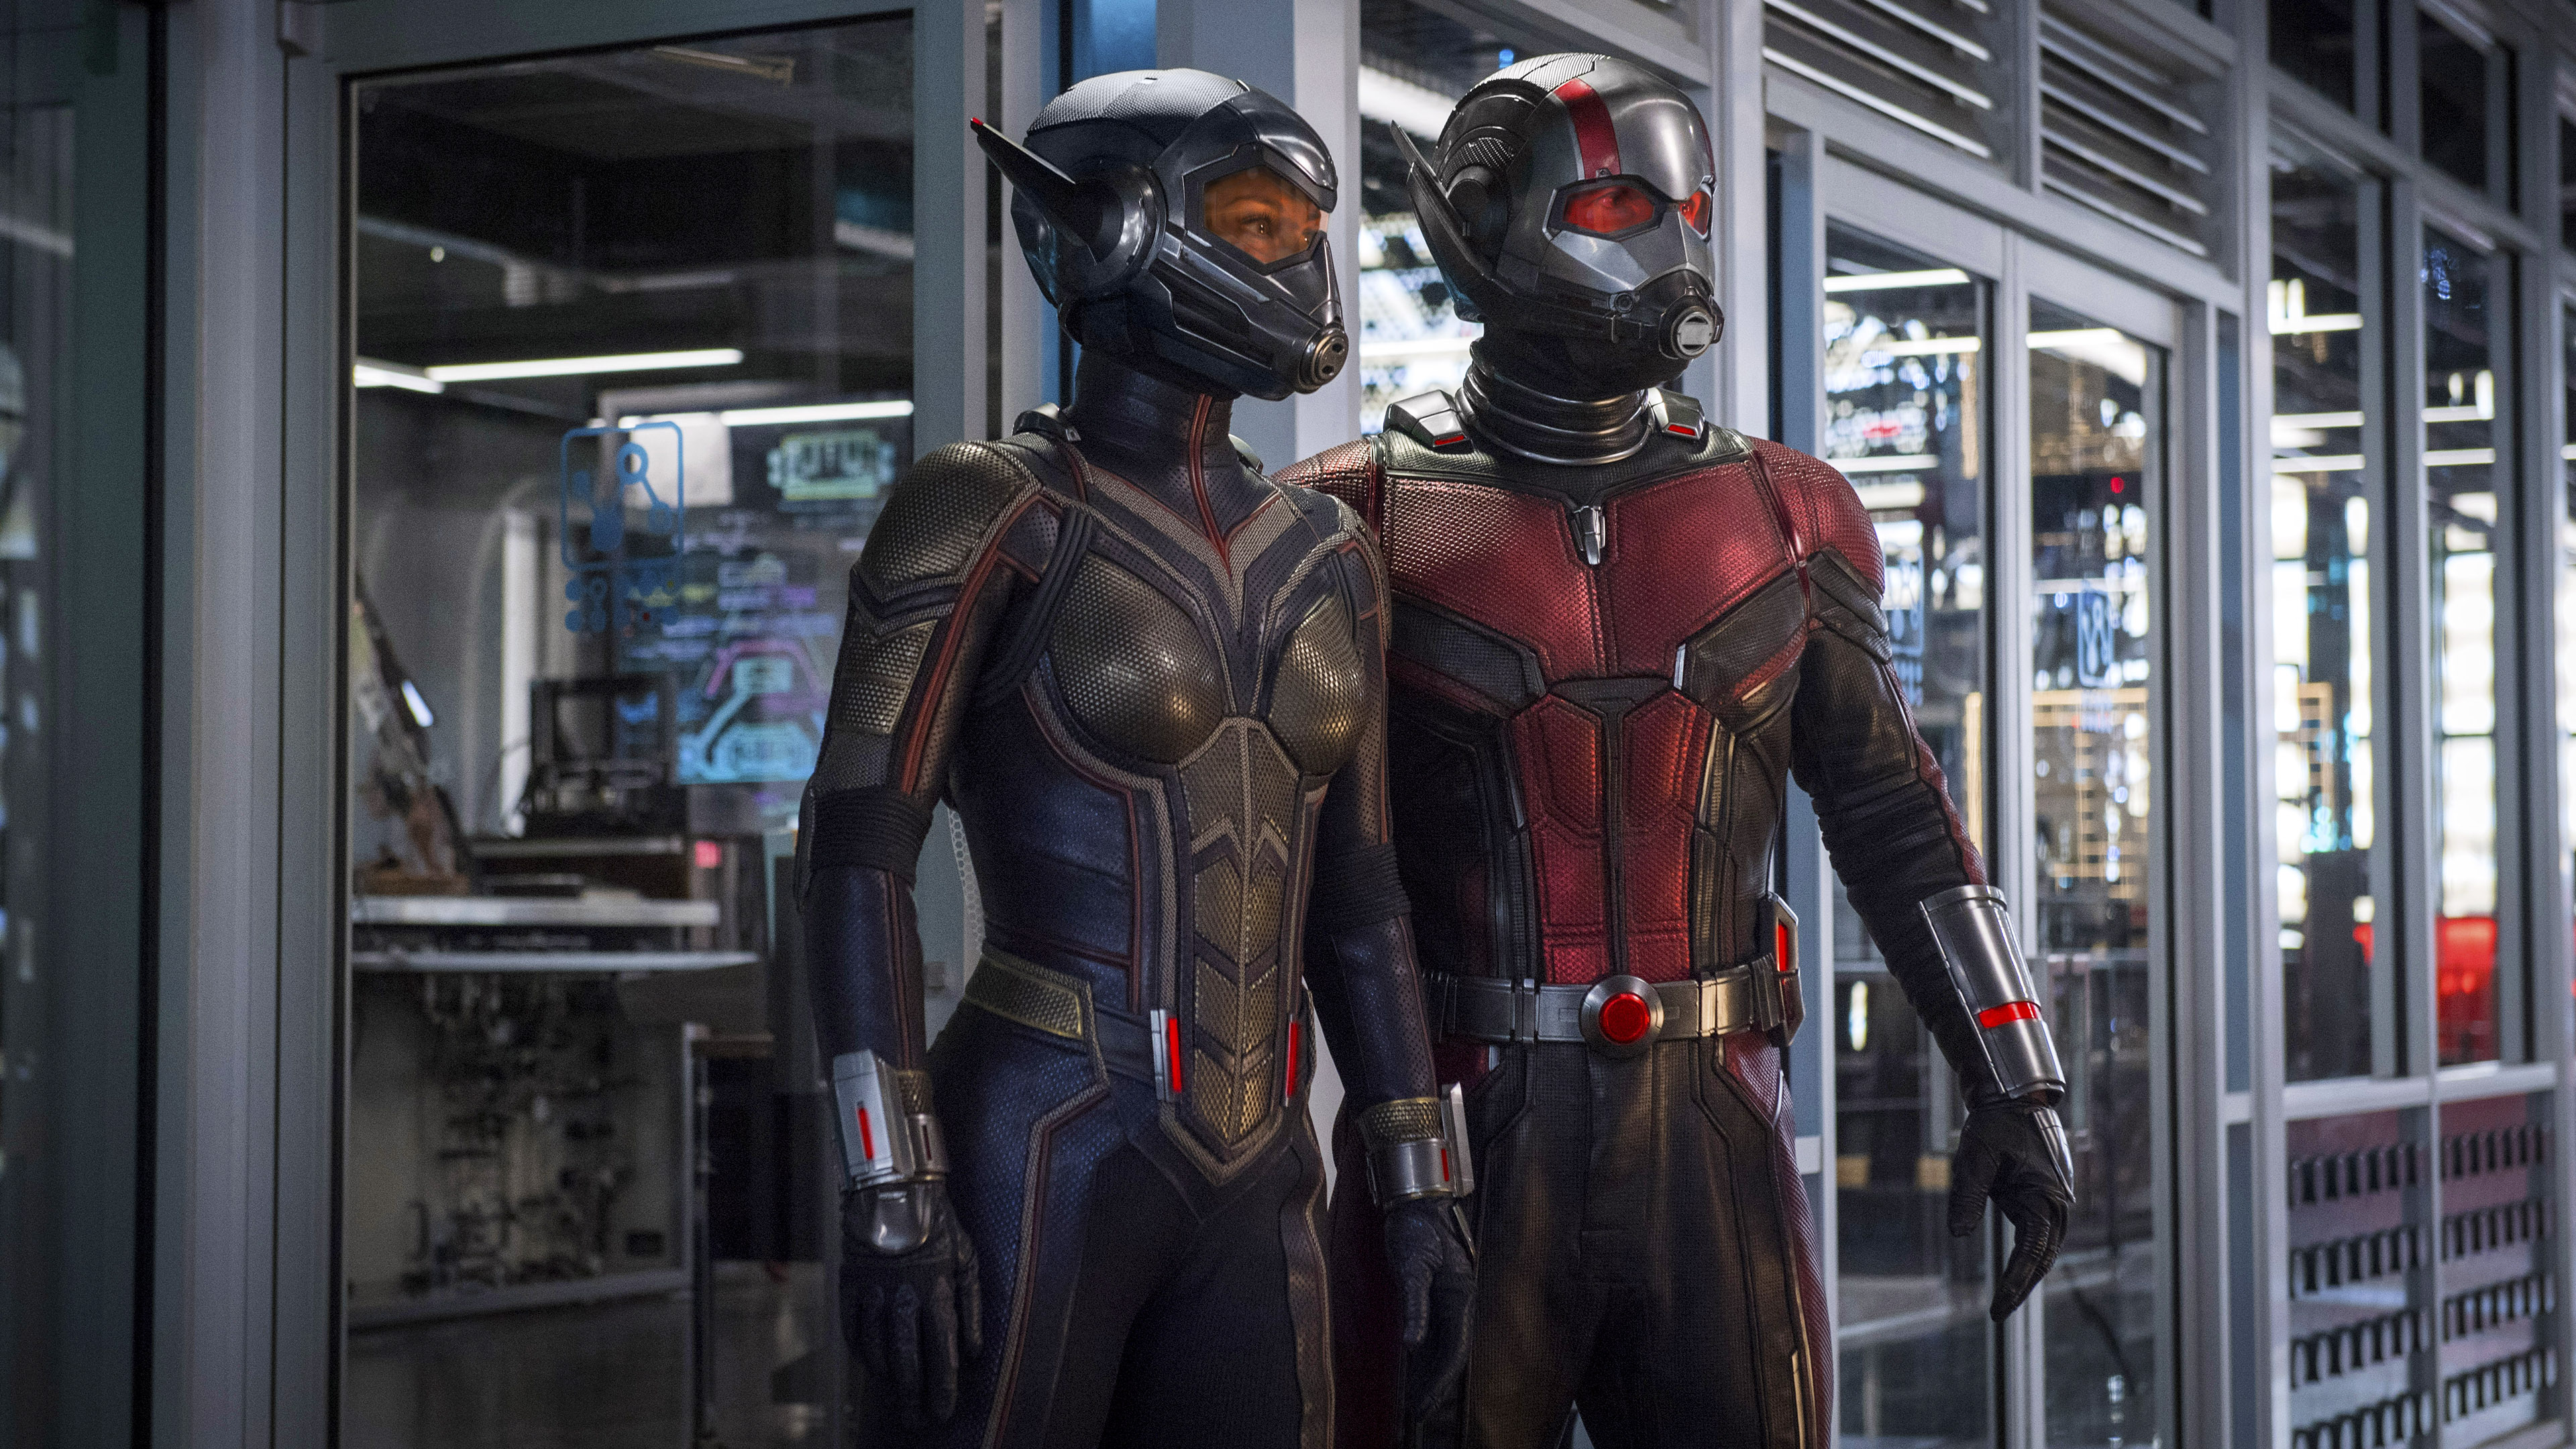 Marvel Cinematic Universe Marvel Comics Ant Man Paul Rudd The Wasp Evangeline Lilly Ant Man And The  3840x2160